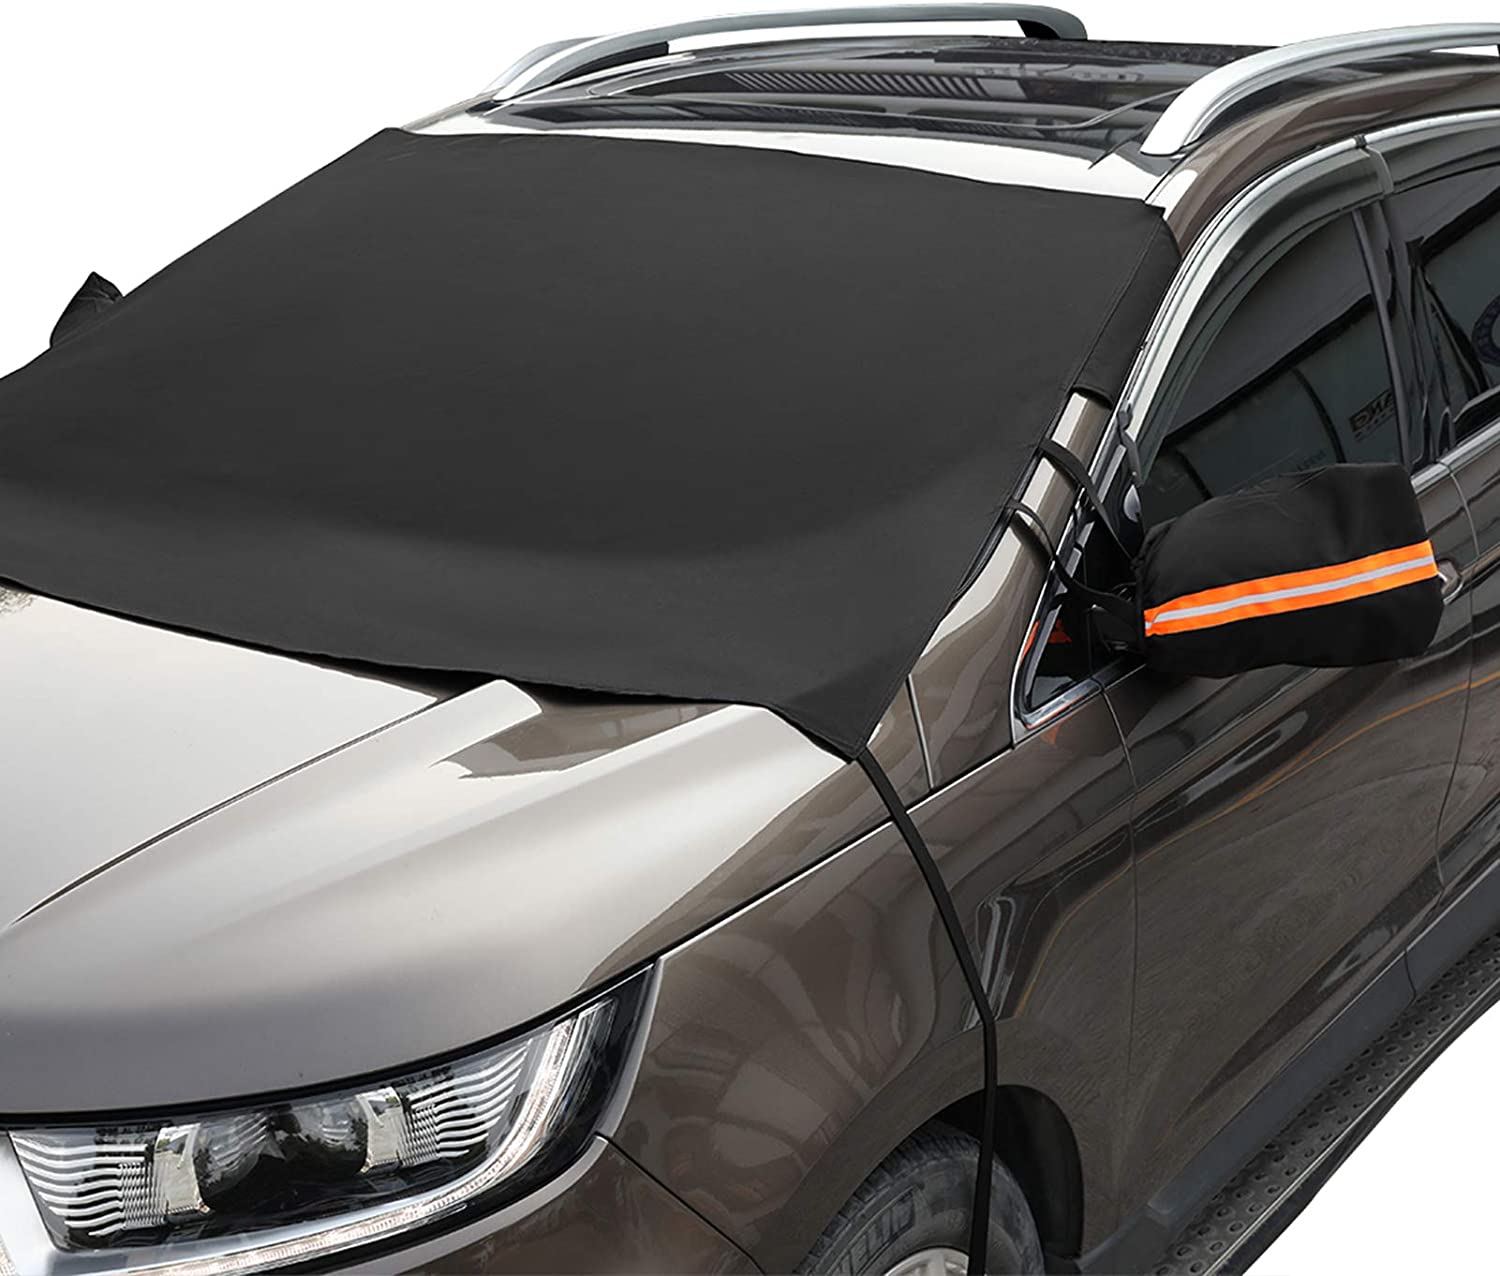 KKTICK Car Windshield Snow Cover, [Upgraded Version] India